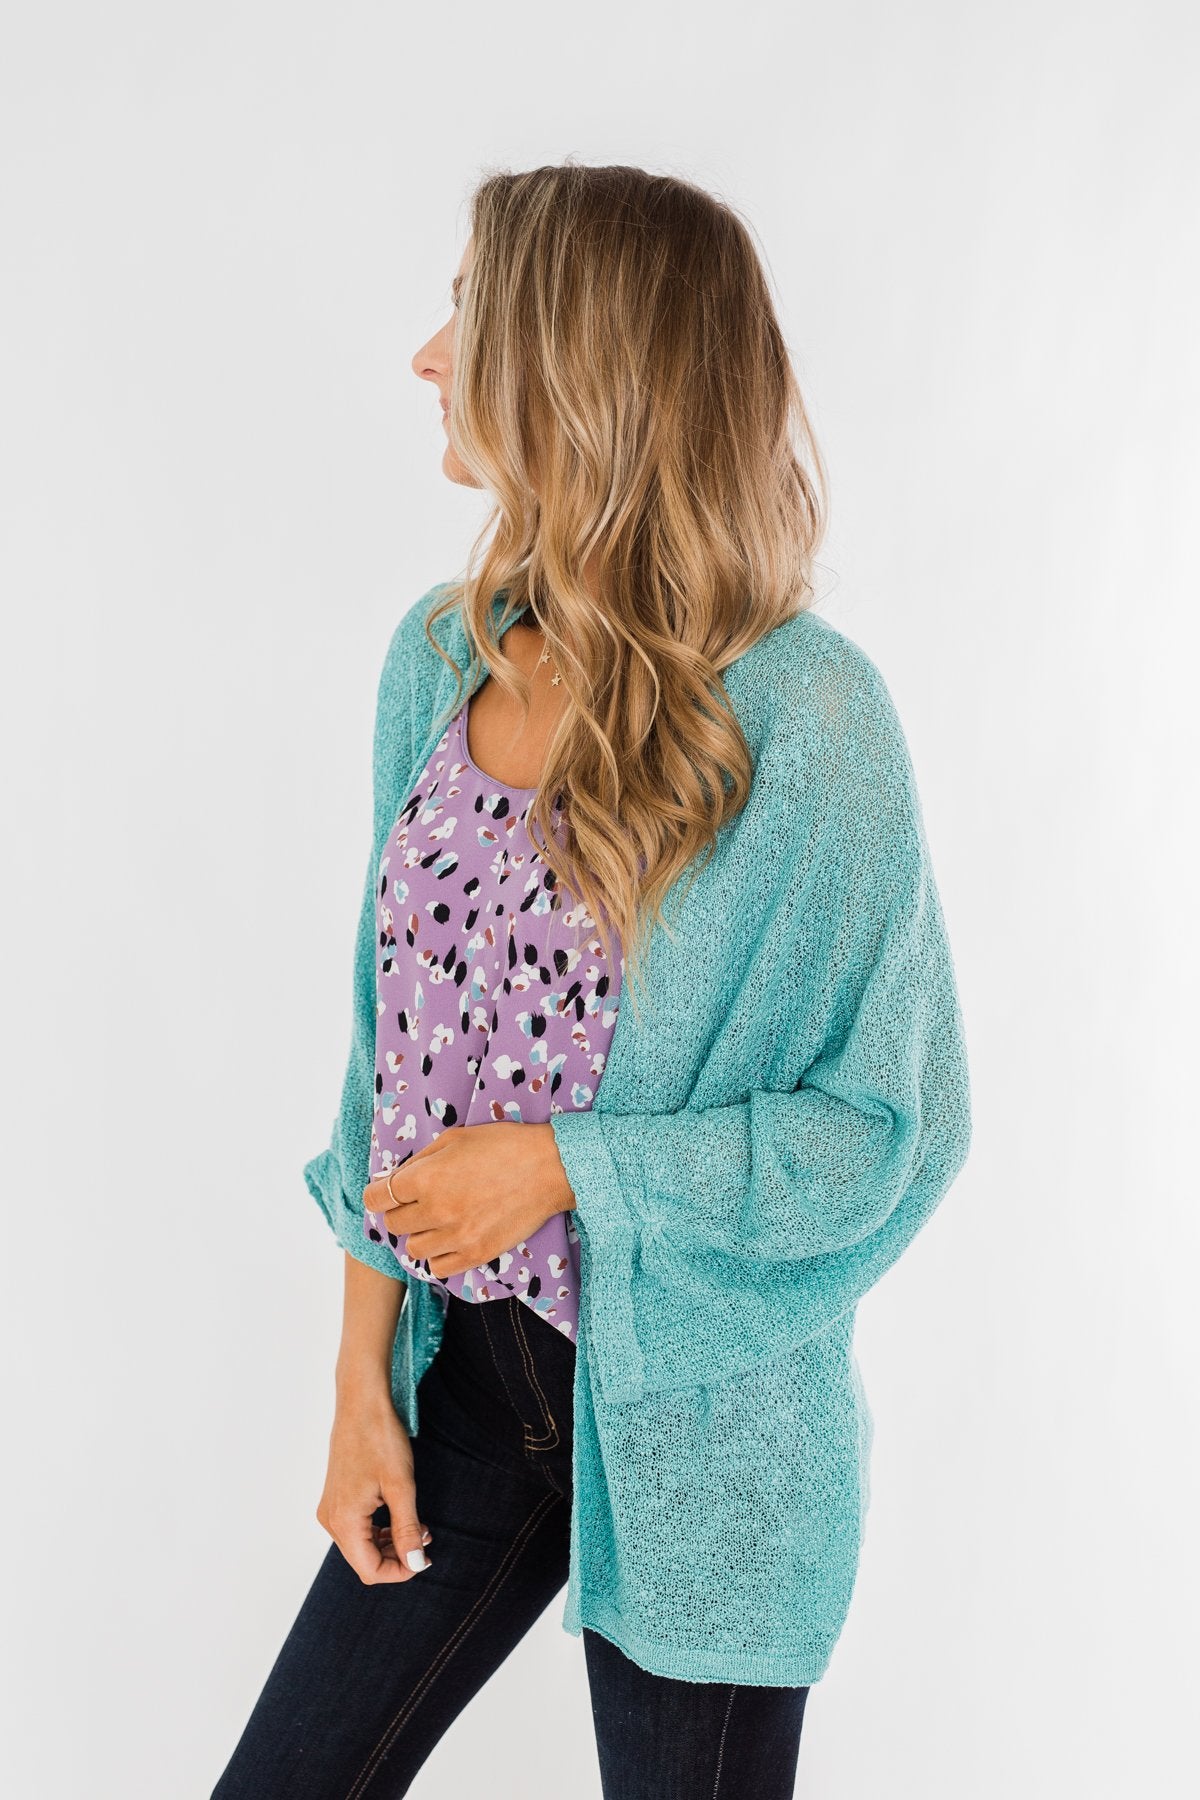 Waiting On A Miracle Knitted Cardigan- Deep Aqua Blue